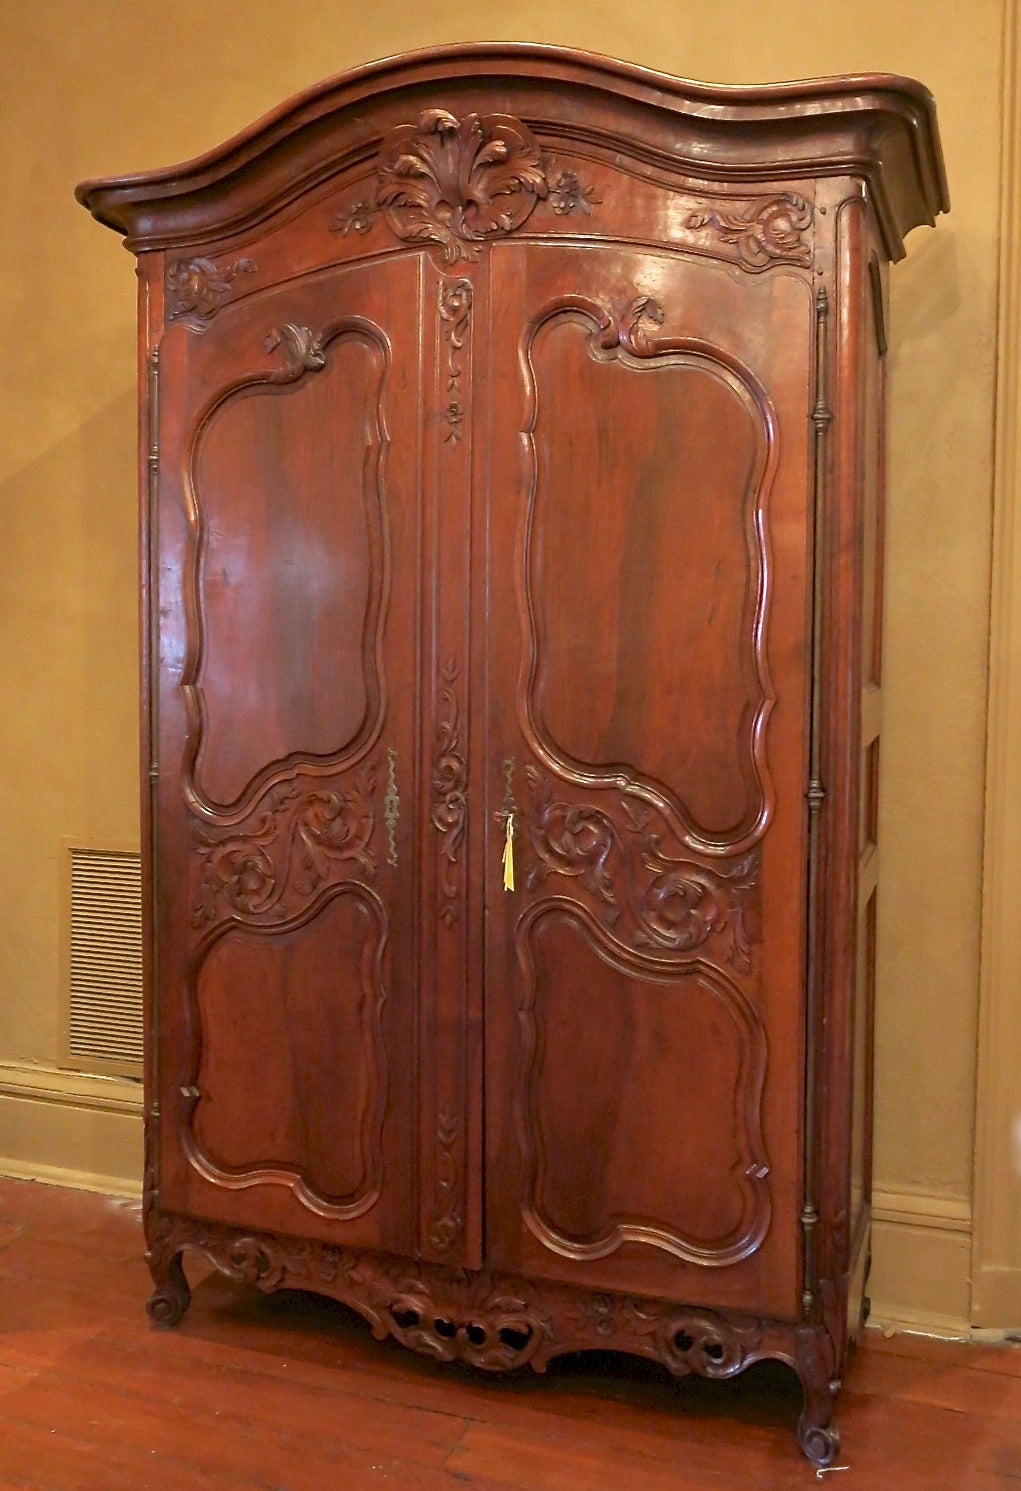 Antique French 18th century period Regence walnut armoire, with detailed carvings, curved bonnet, curved doors and original full length pewter hinges.